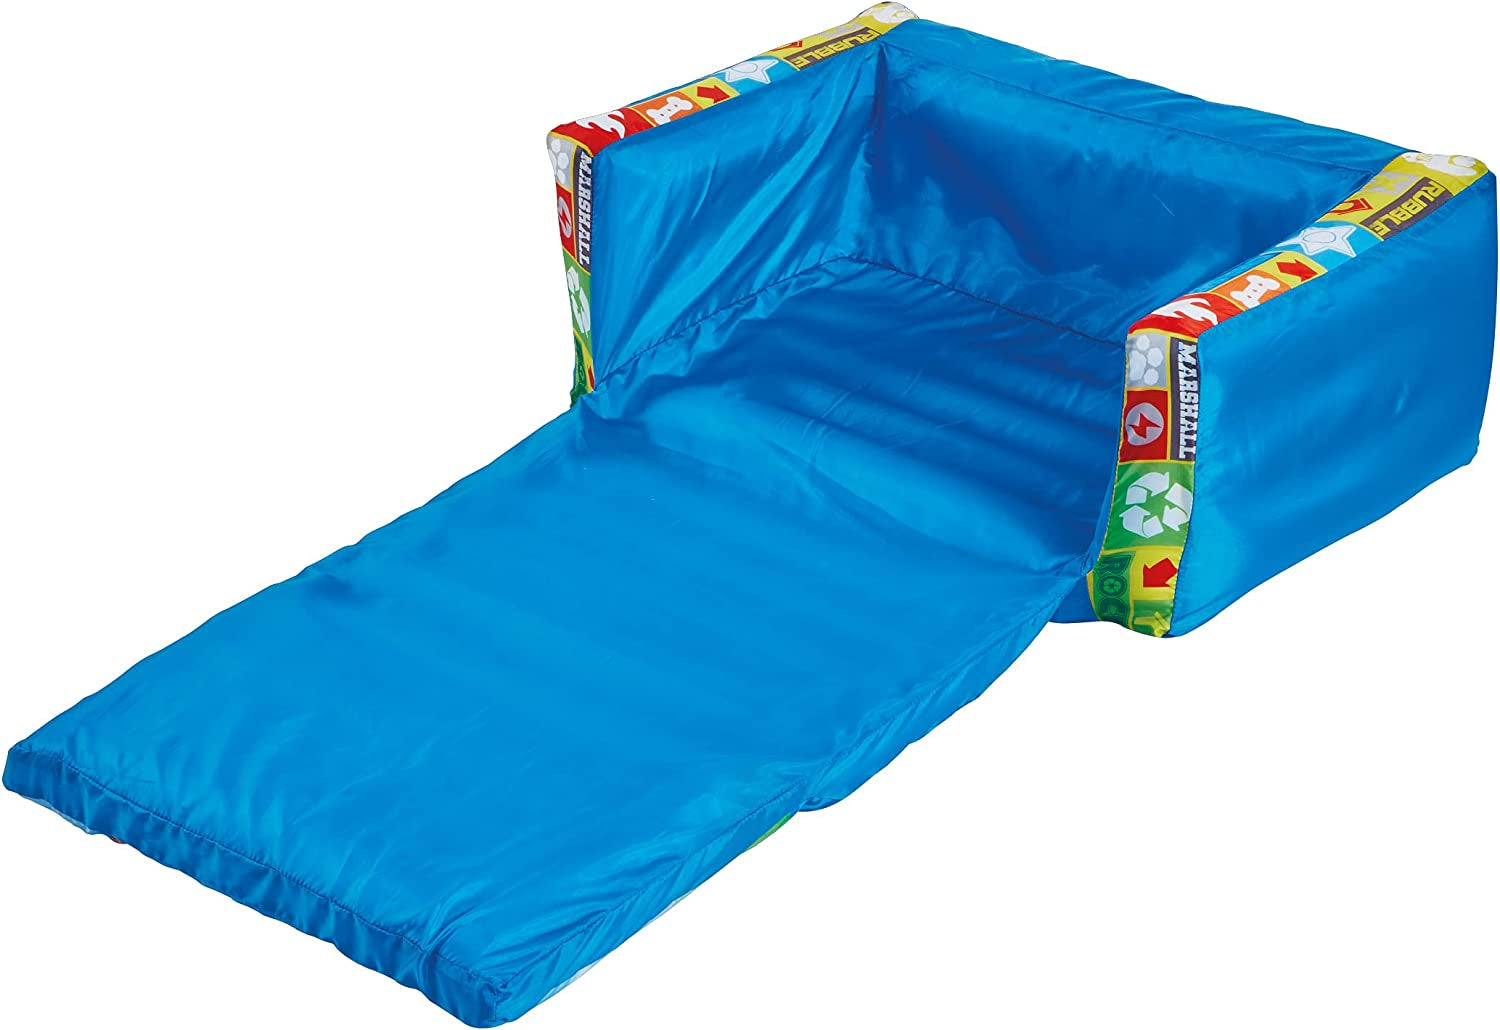 2 in 1 Inflatable Flip Out Mini Sofa and Lounger, Fabric, Blue, 105X68X26 Cm